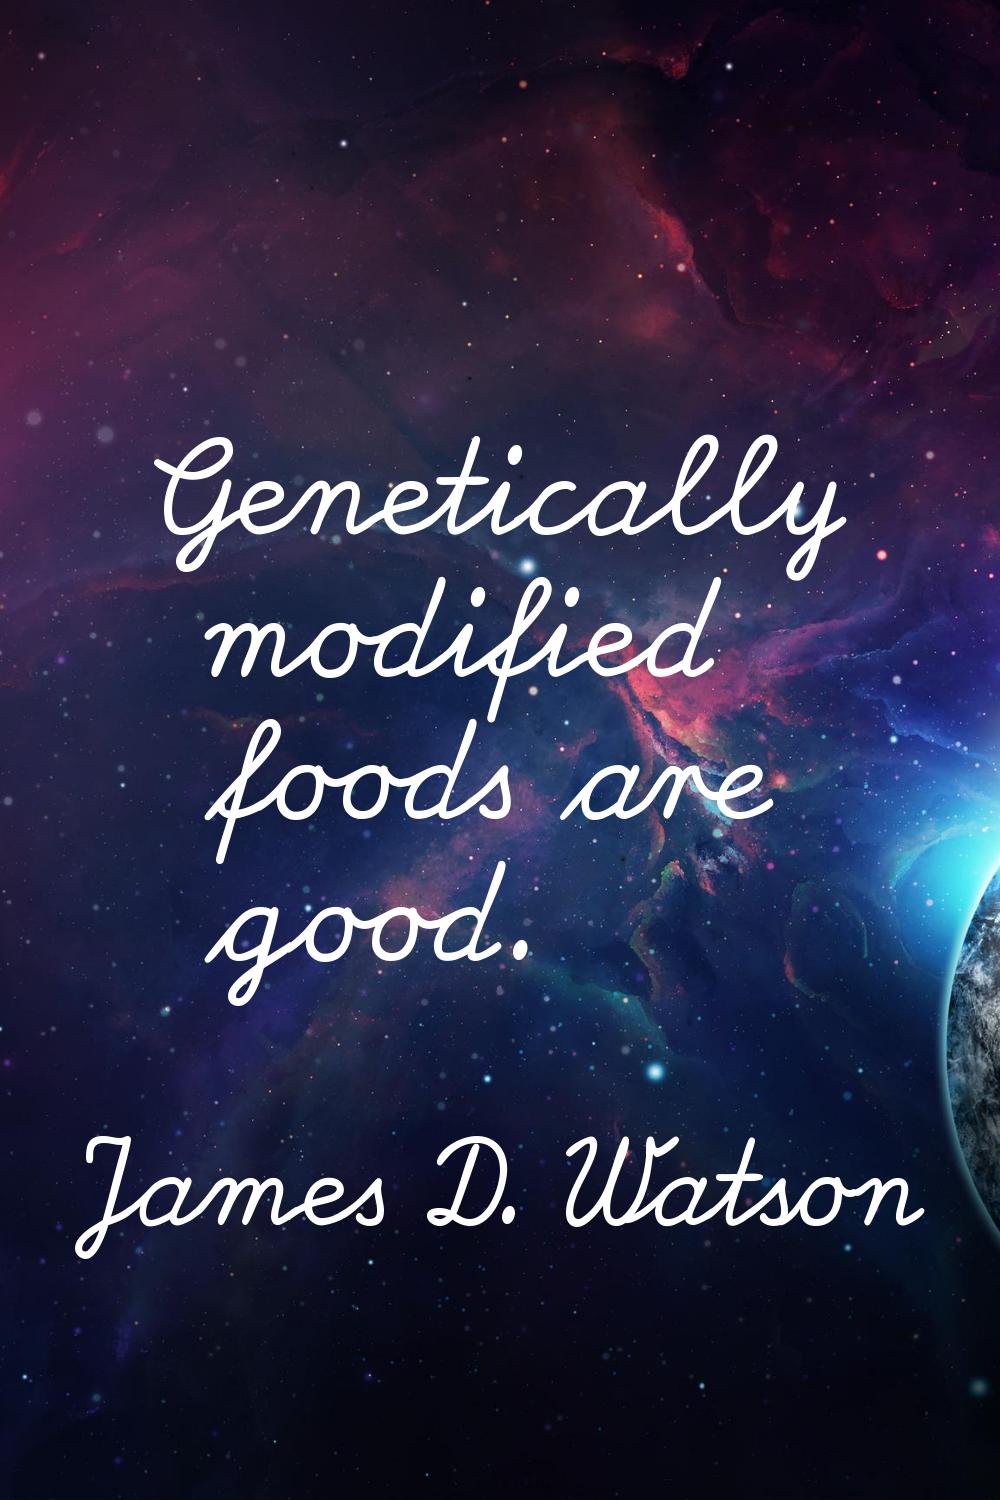 Genetically modified foods are good.